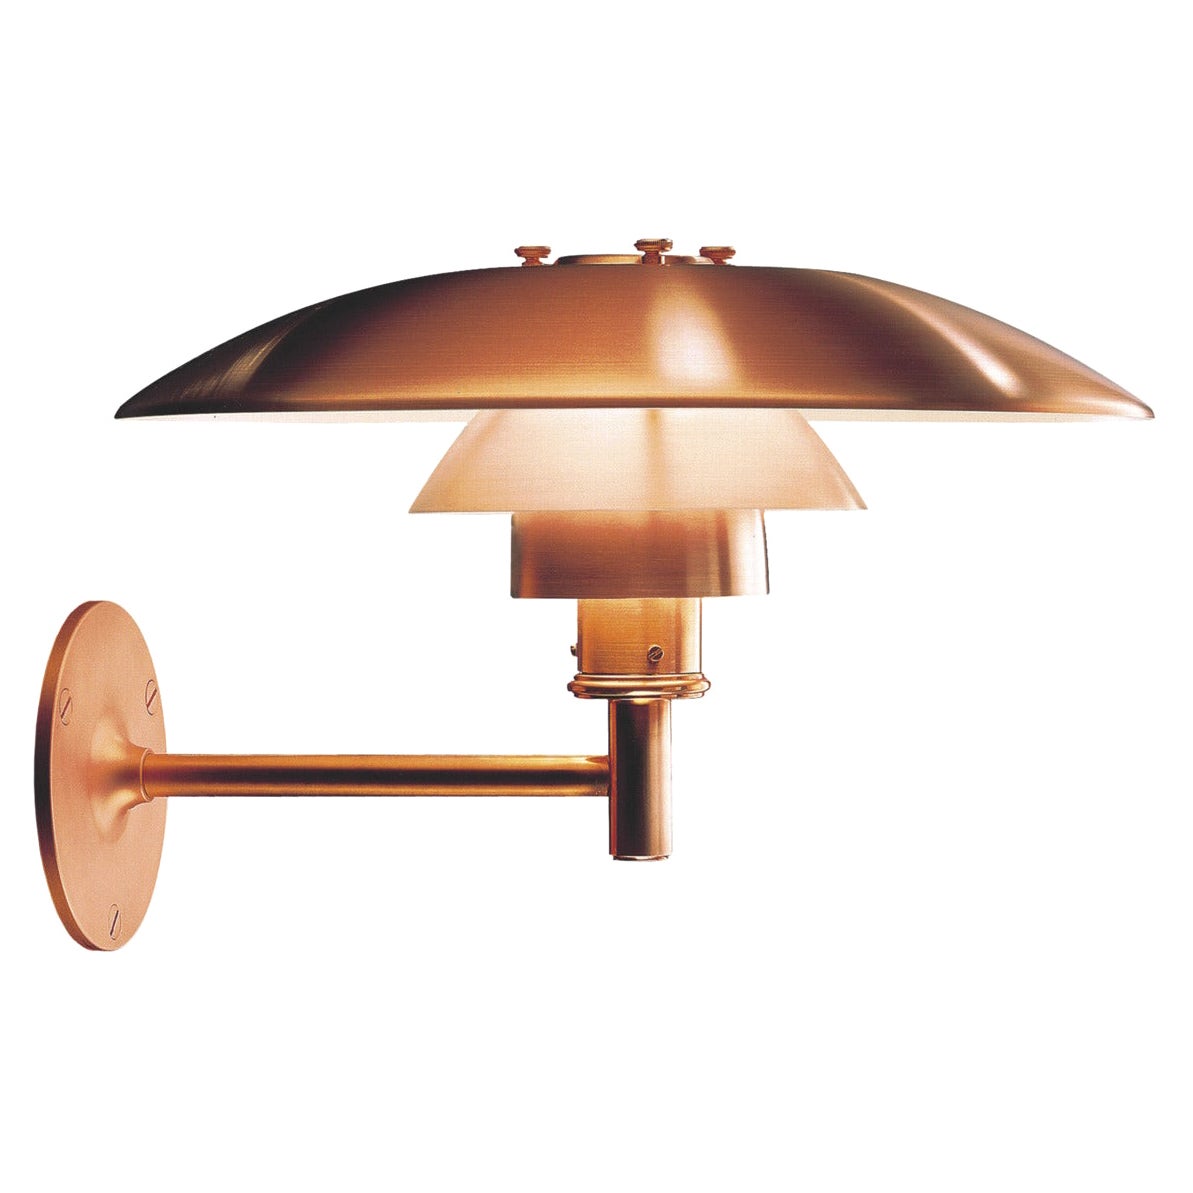 Large Poul Henningsen 'PH Wall' Outdoor Sconce Louis Poulsen in Raw Copper Sale at 1stDibs | louis poulsen sconce, louis poulsen